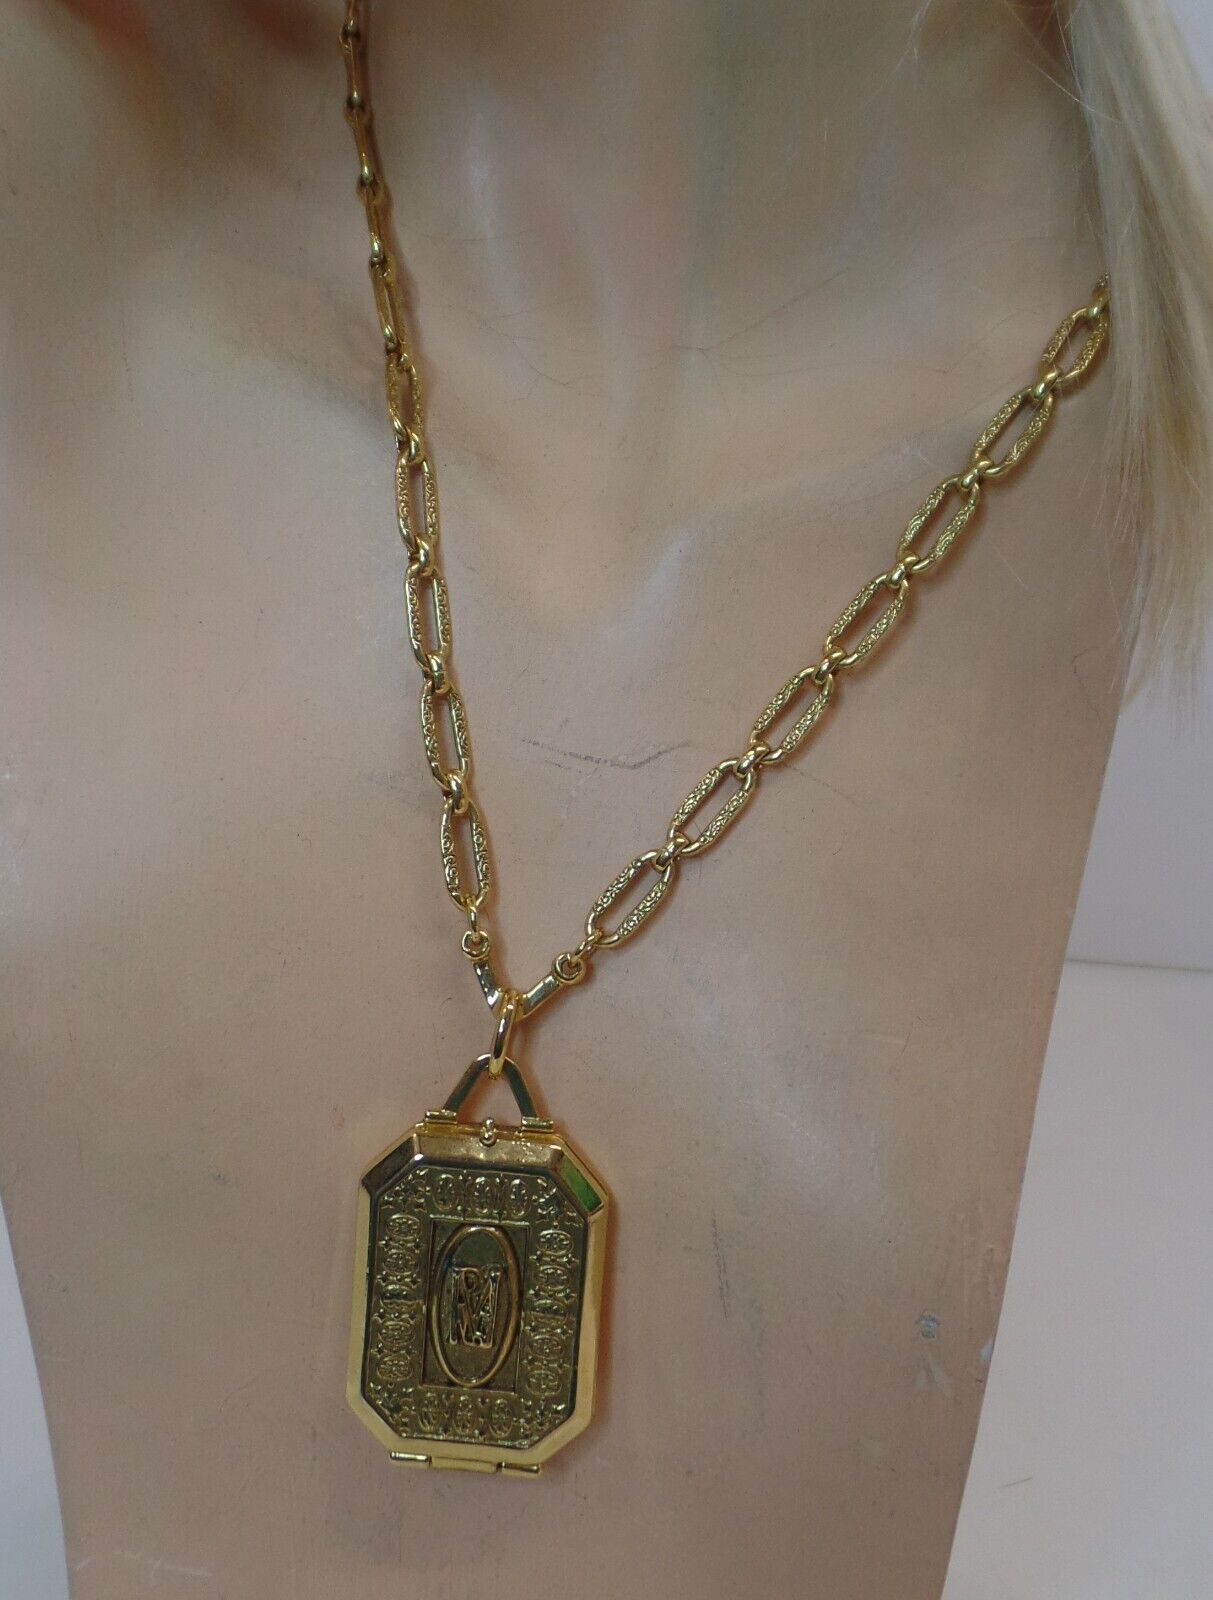 Primary image for Antiquities Couture NWT Goldtone Maria Antoinette Square Locket Adj to 30"